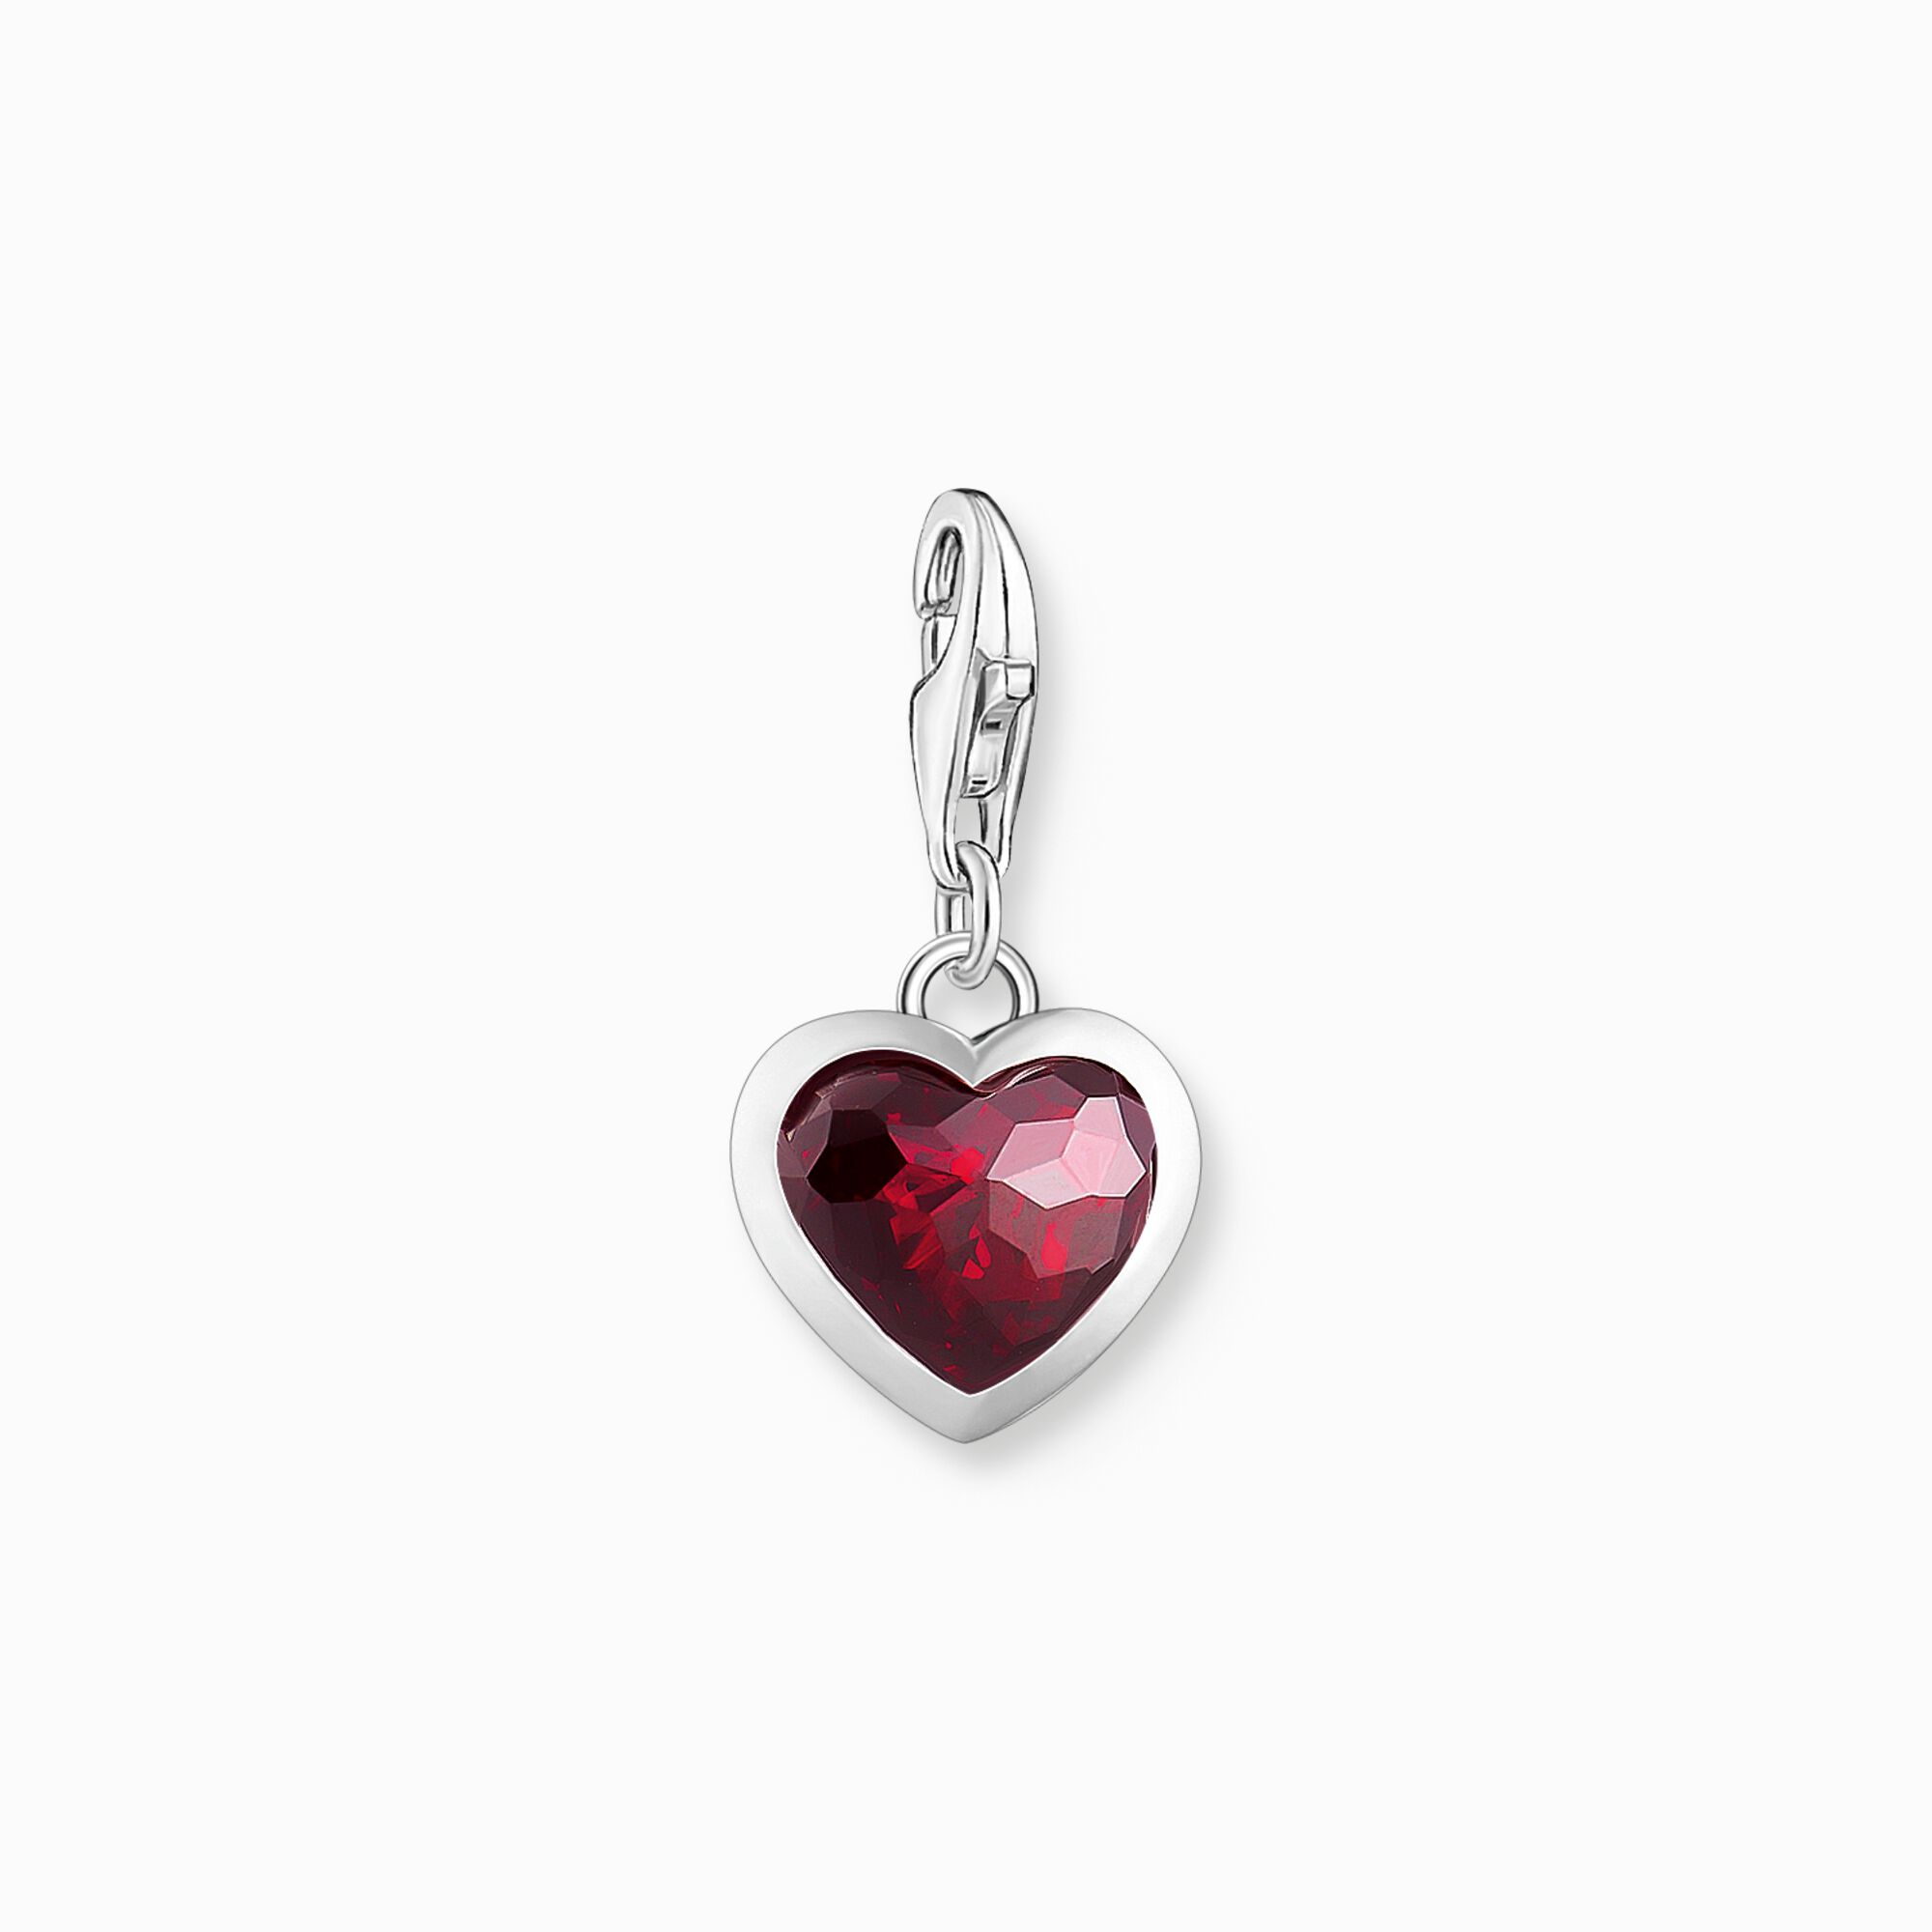 Silver charm pendant with red stone in heart-shape from the Charm Club collection in the THOMAS SABO online store